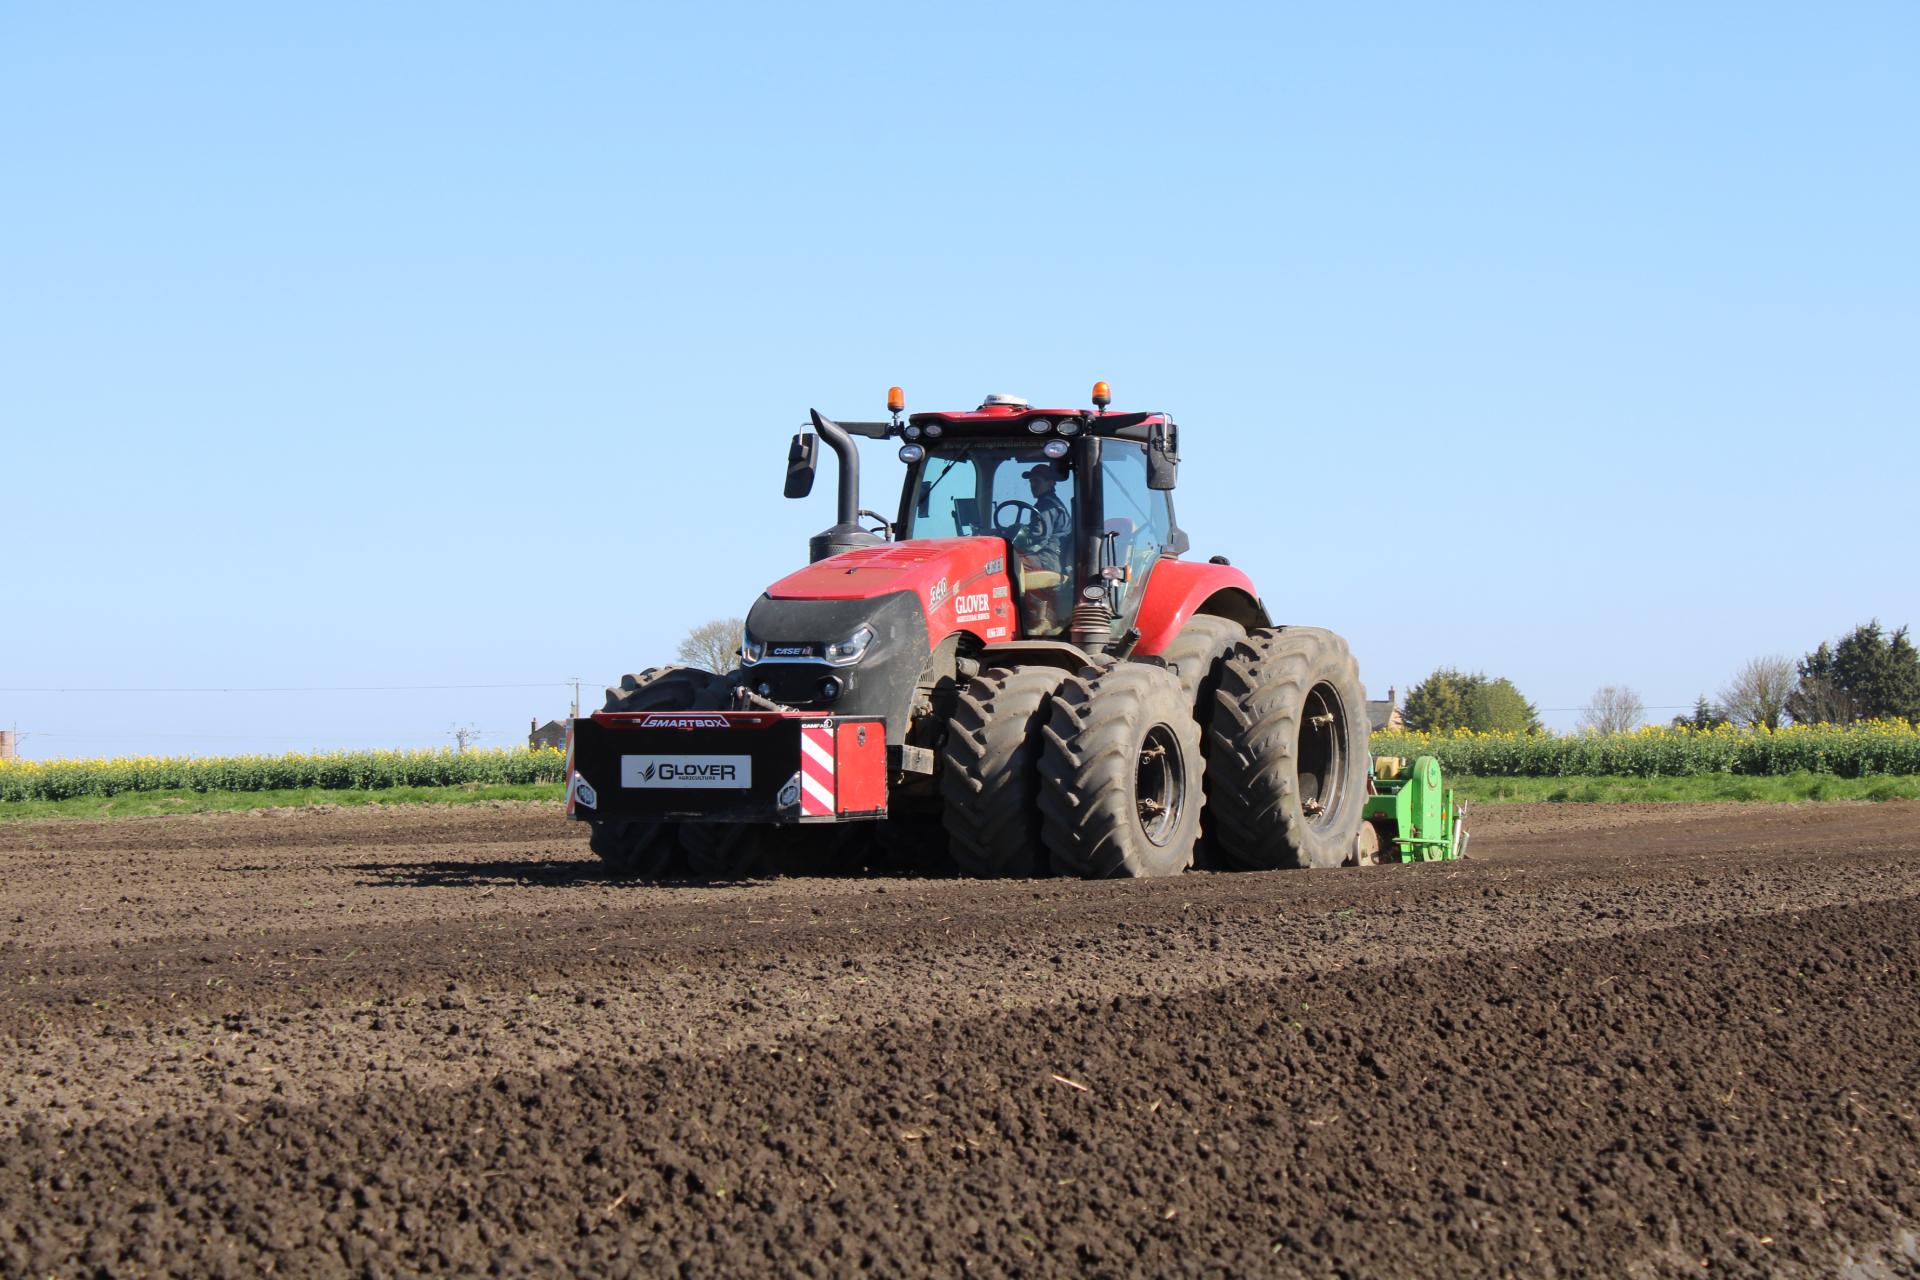 Glover red tractor in the filed for seed bed preparation